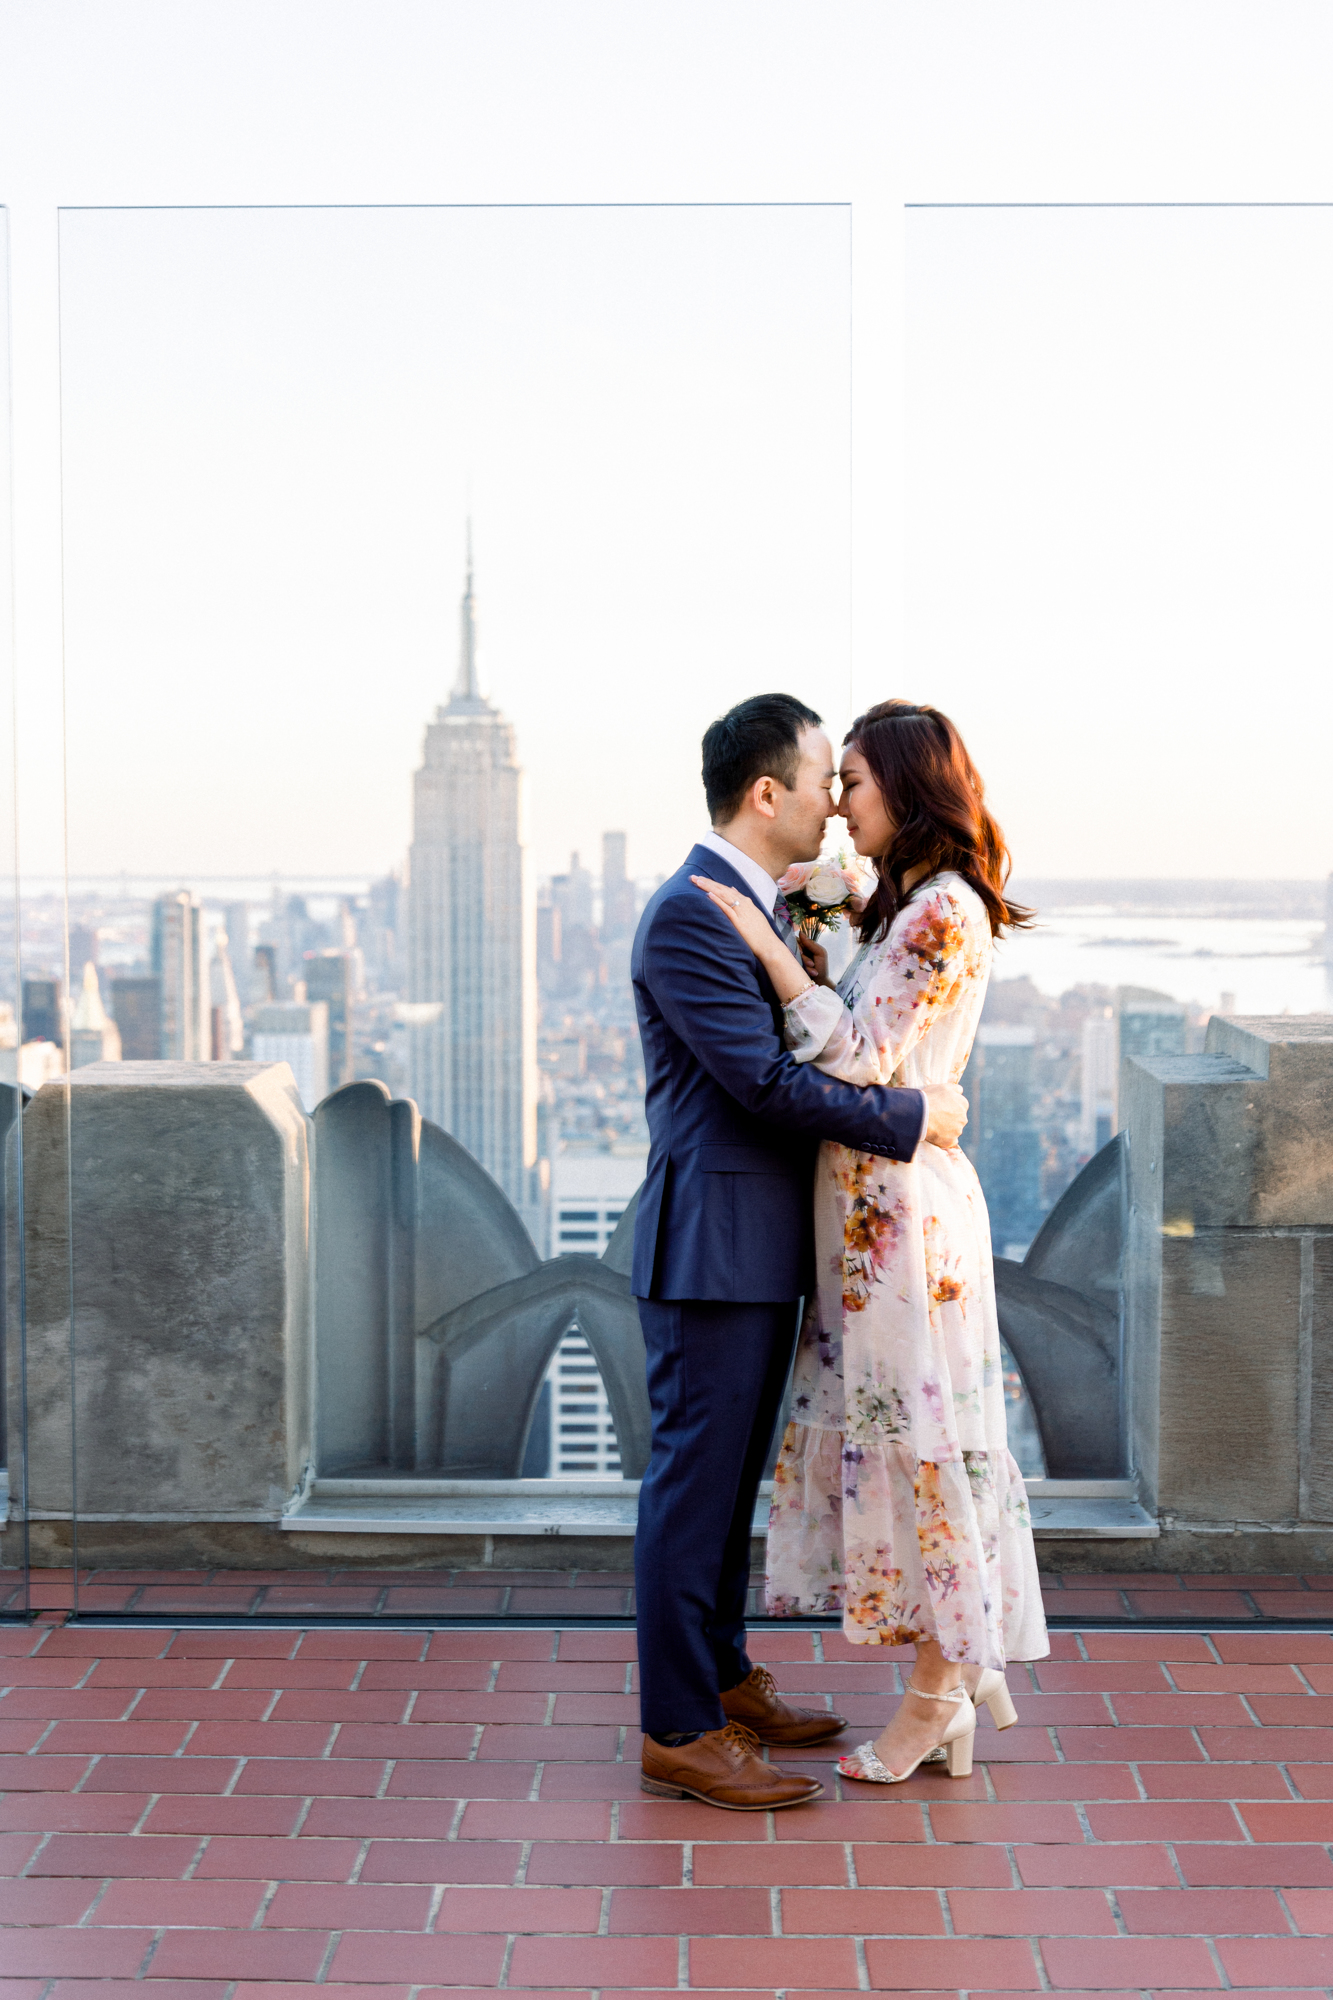 Sweet Top of the Rock Engagement Photography at Sunset in NYC